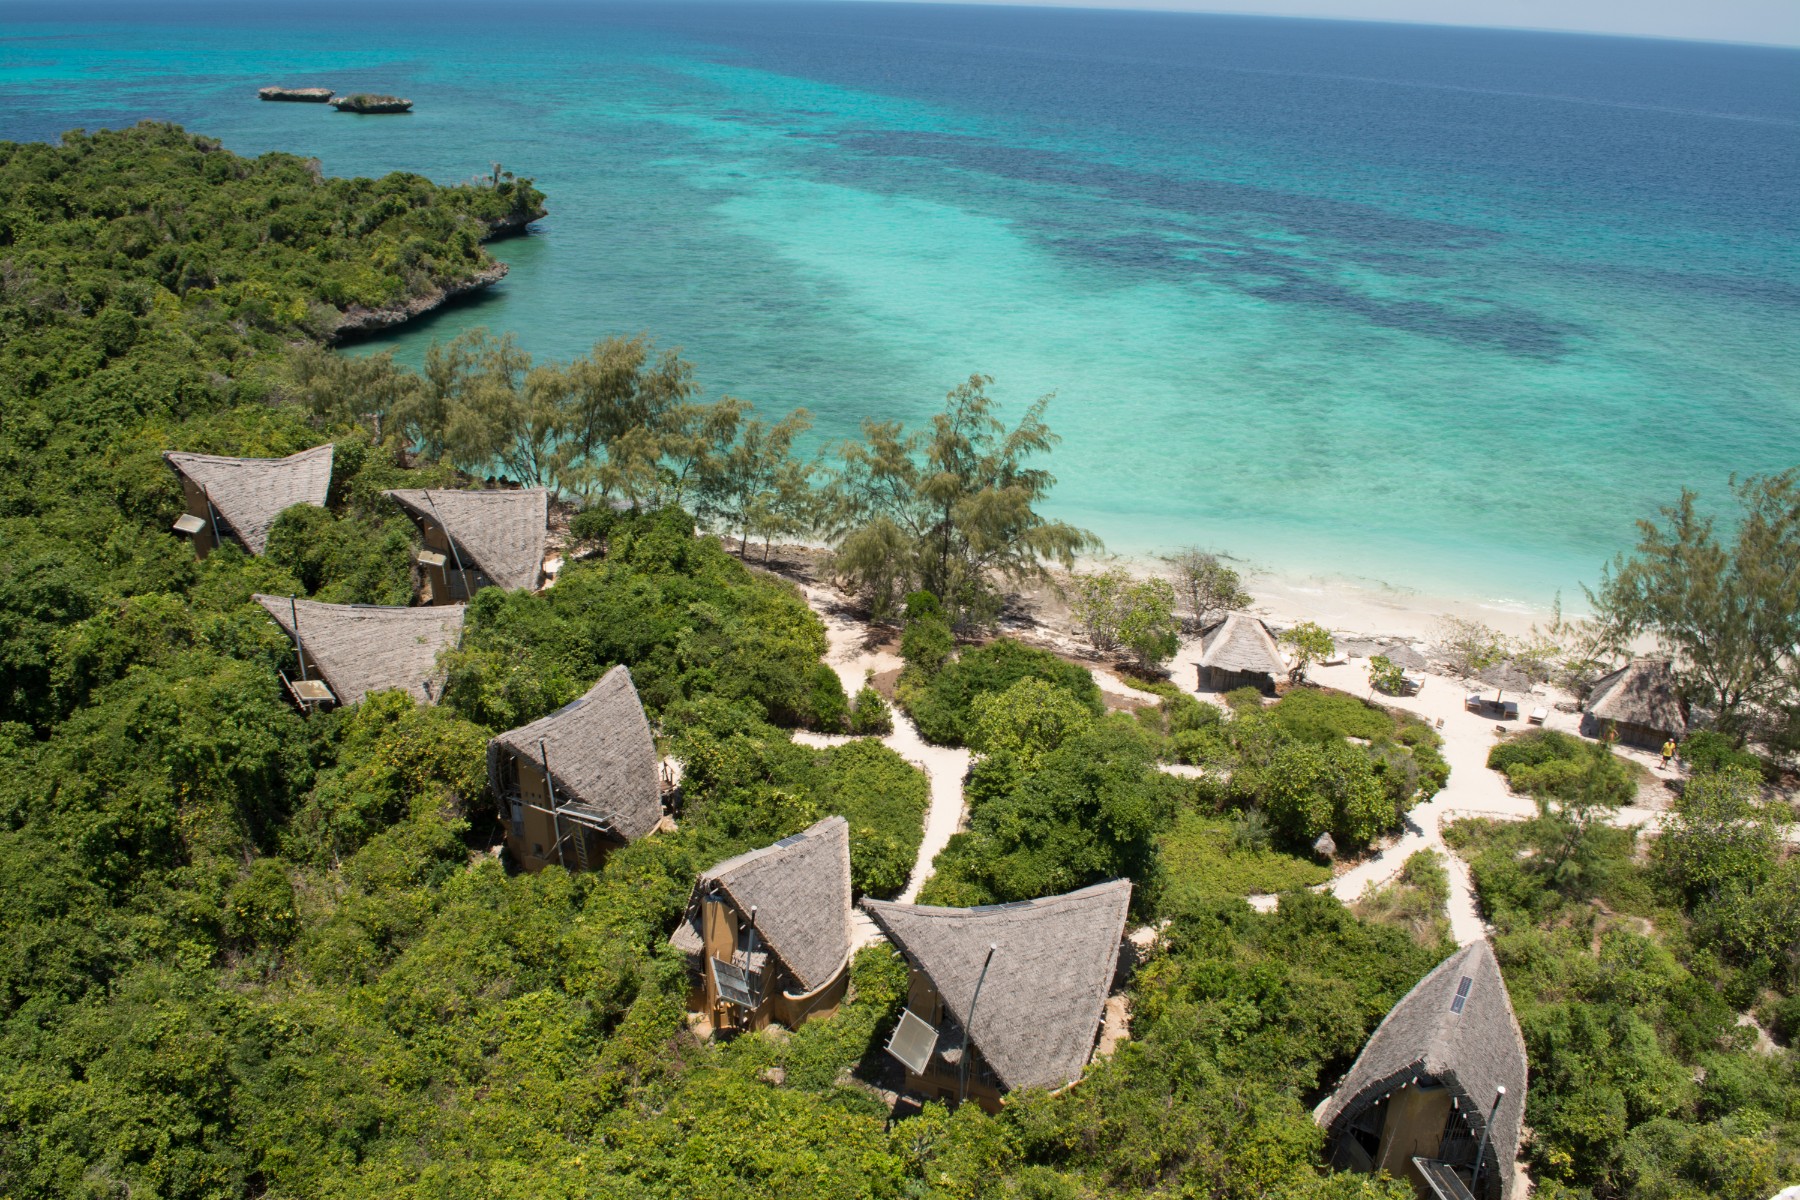 sustainable tourism practices include choosing better accommodations, like these beachfront villas